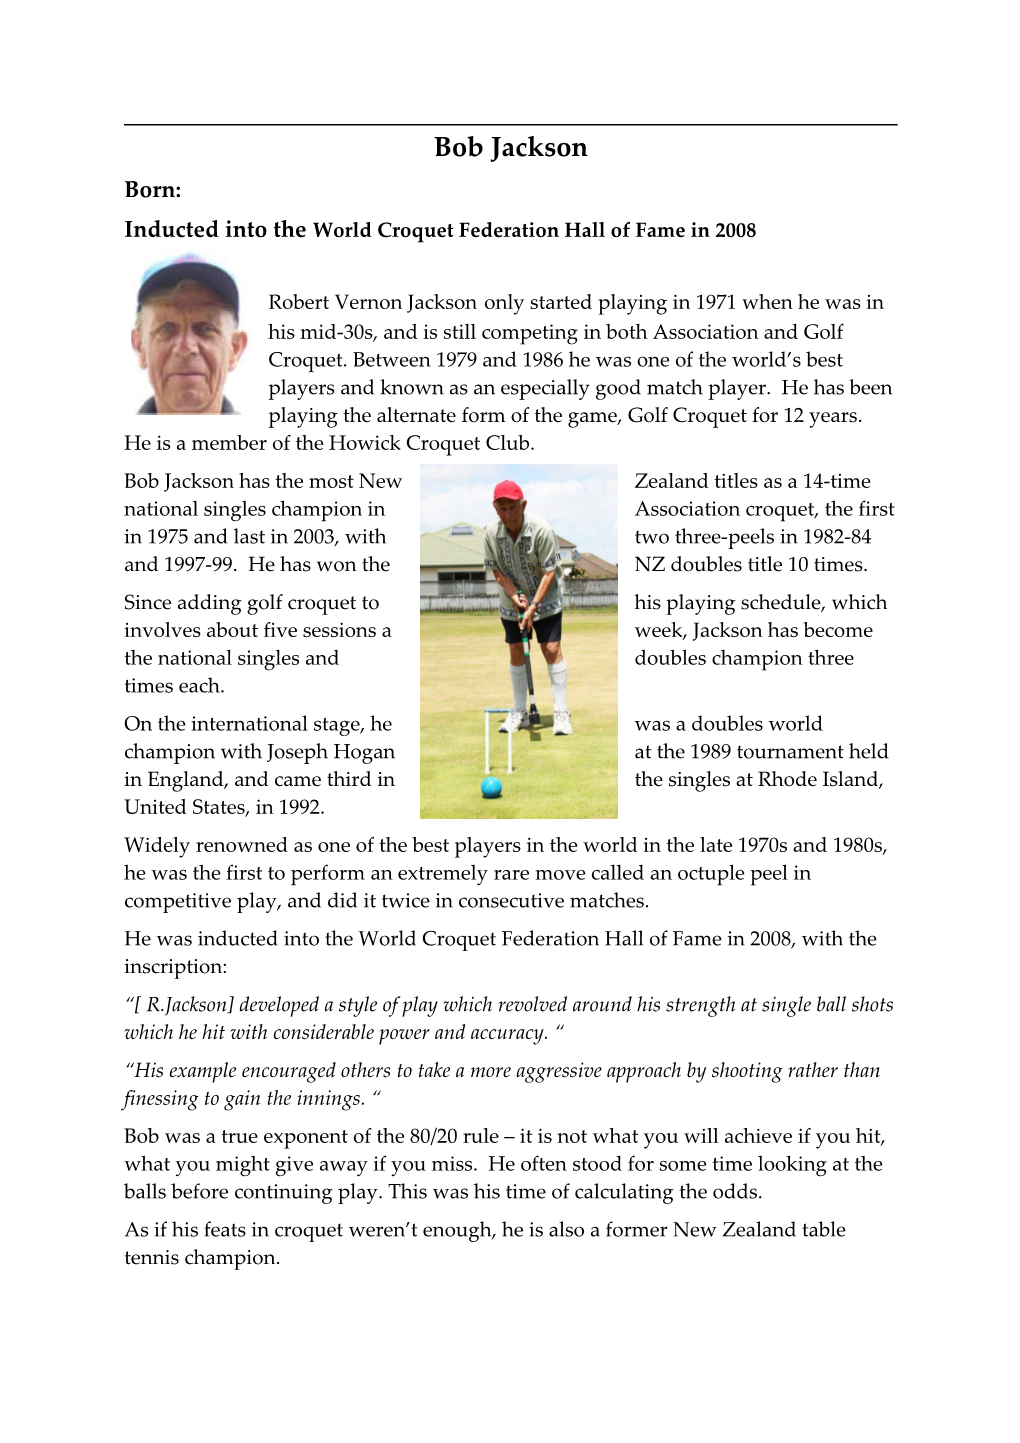 Inducted Into the World Croquet Federation Hall of Fame in 2008